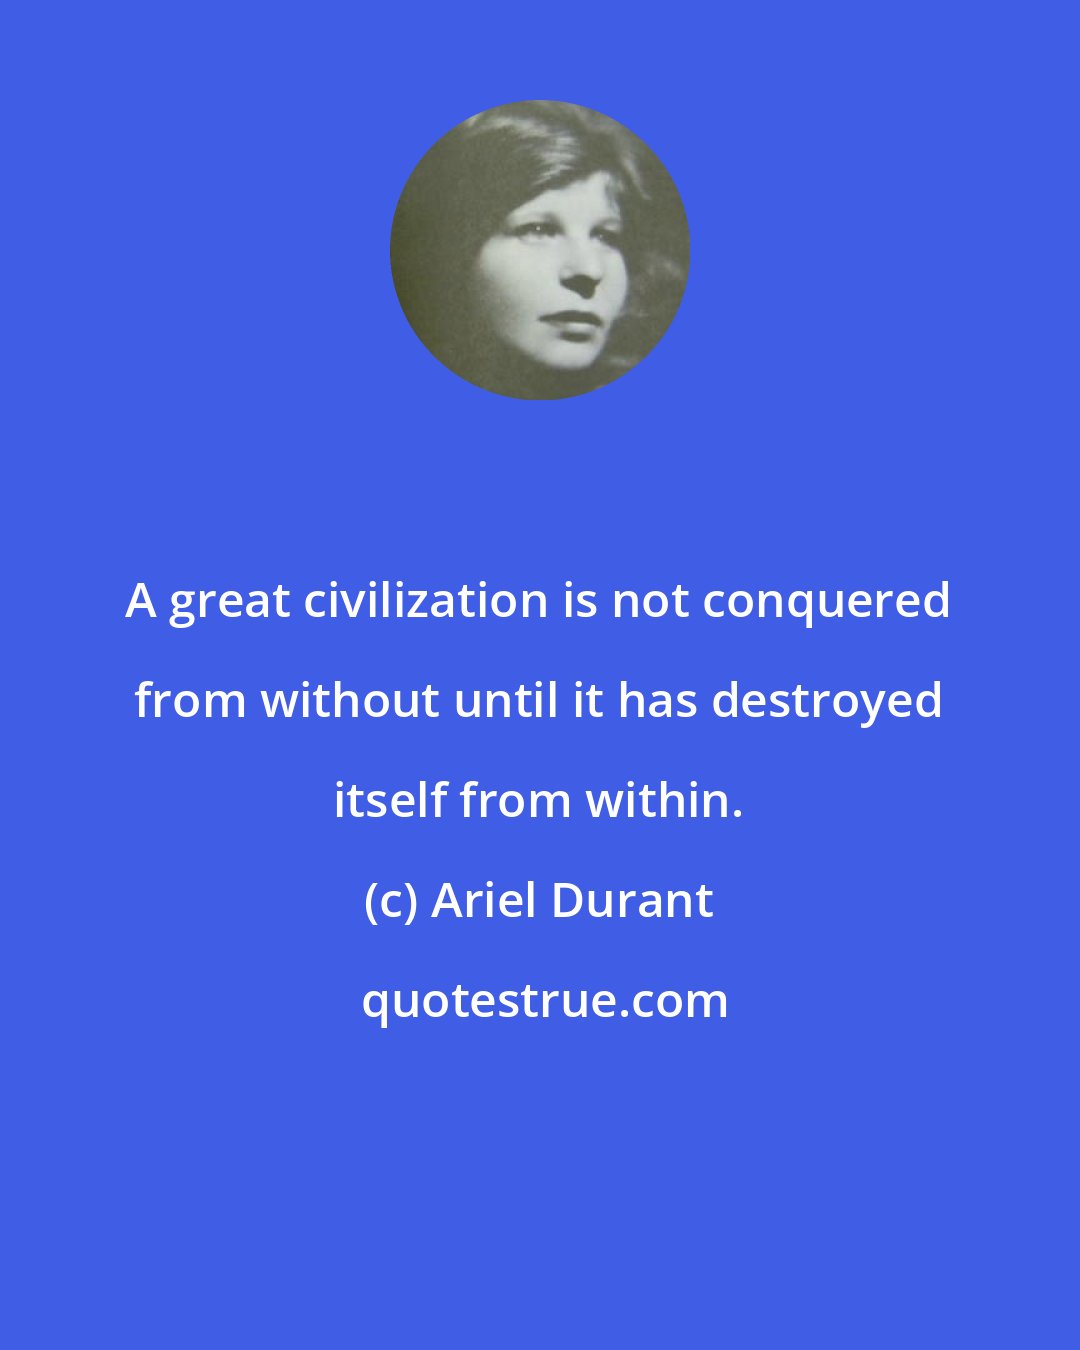 Ariel Durant: A great civilization is not conquered from without until it has destroyed itself from within.